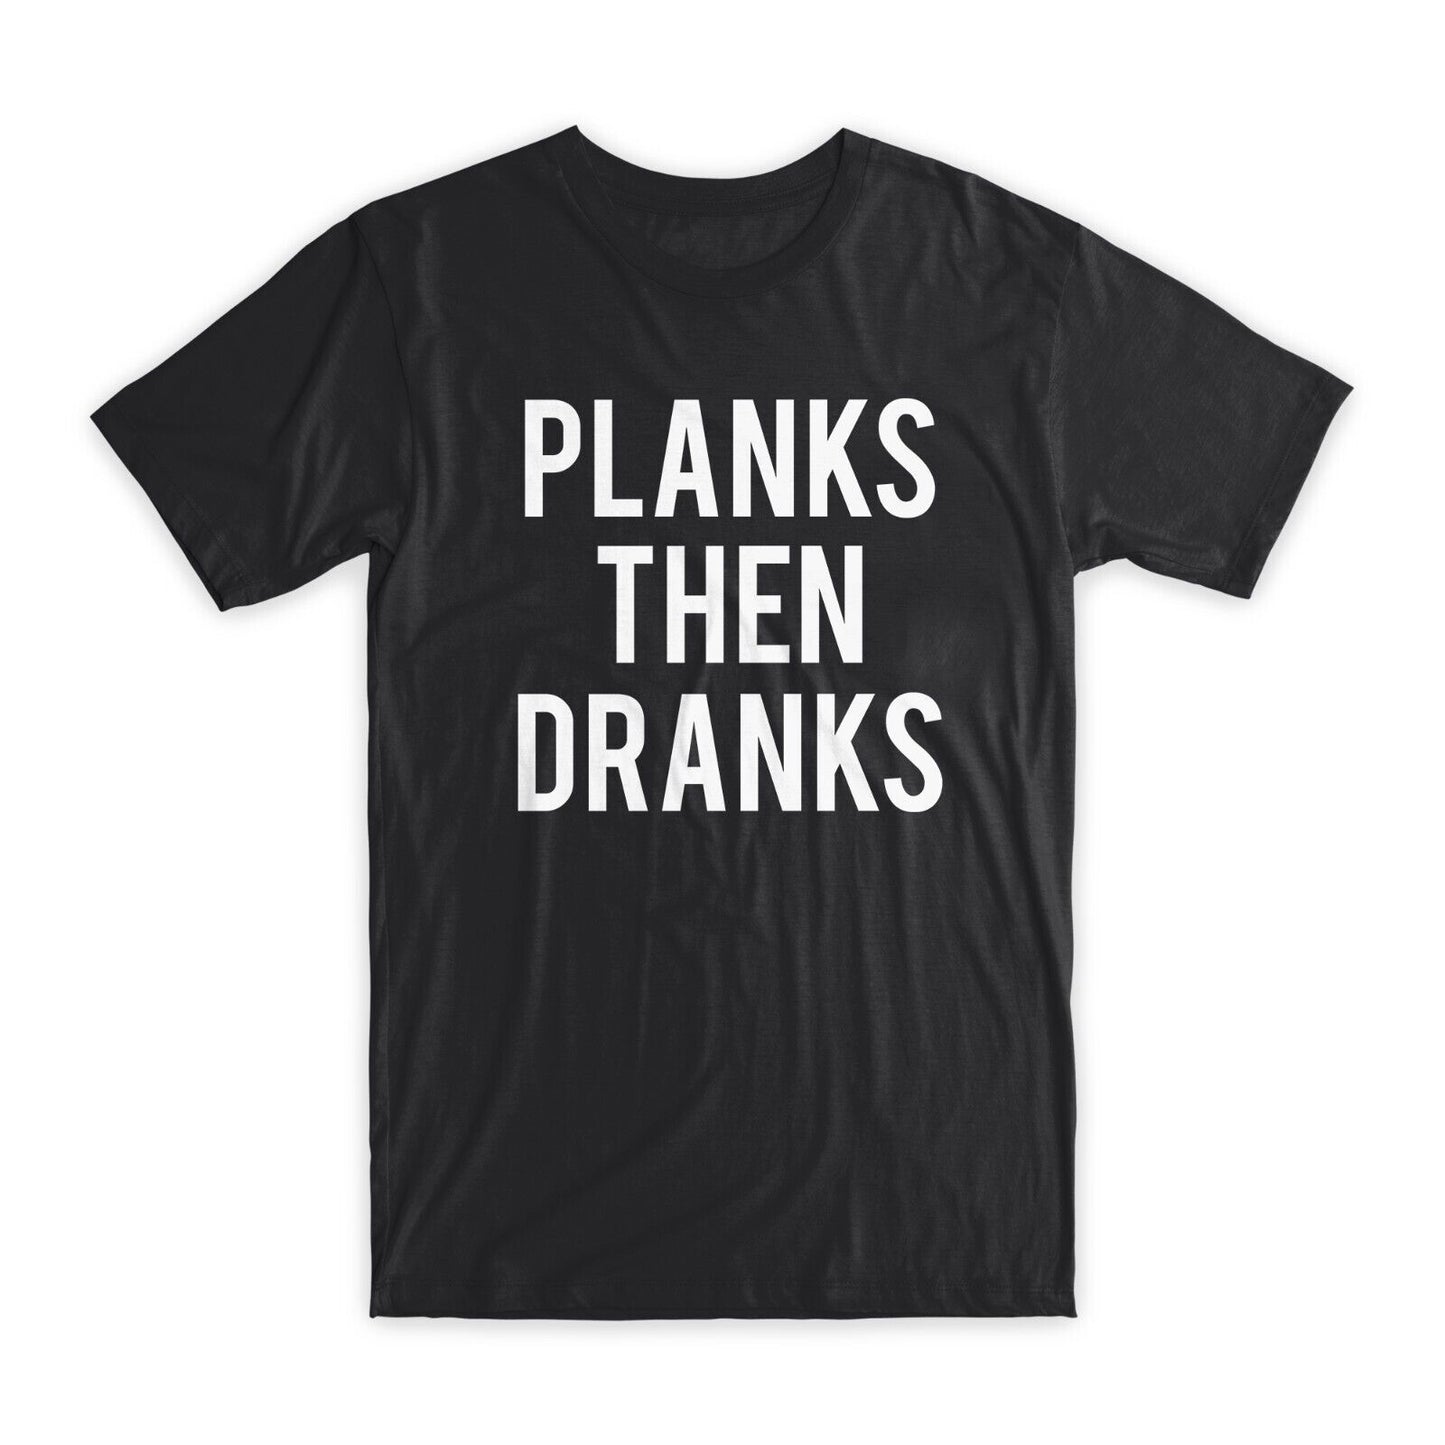 Planks Then Dranks T-Shirt Premium Soft Cotton Crew Neck Funny Tees Gifts NEW